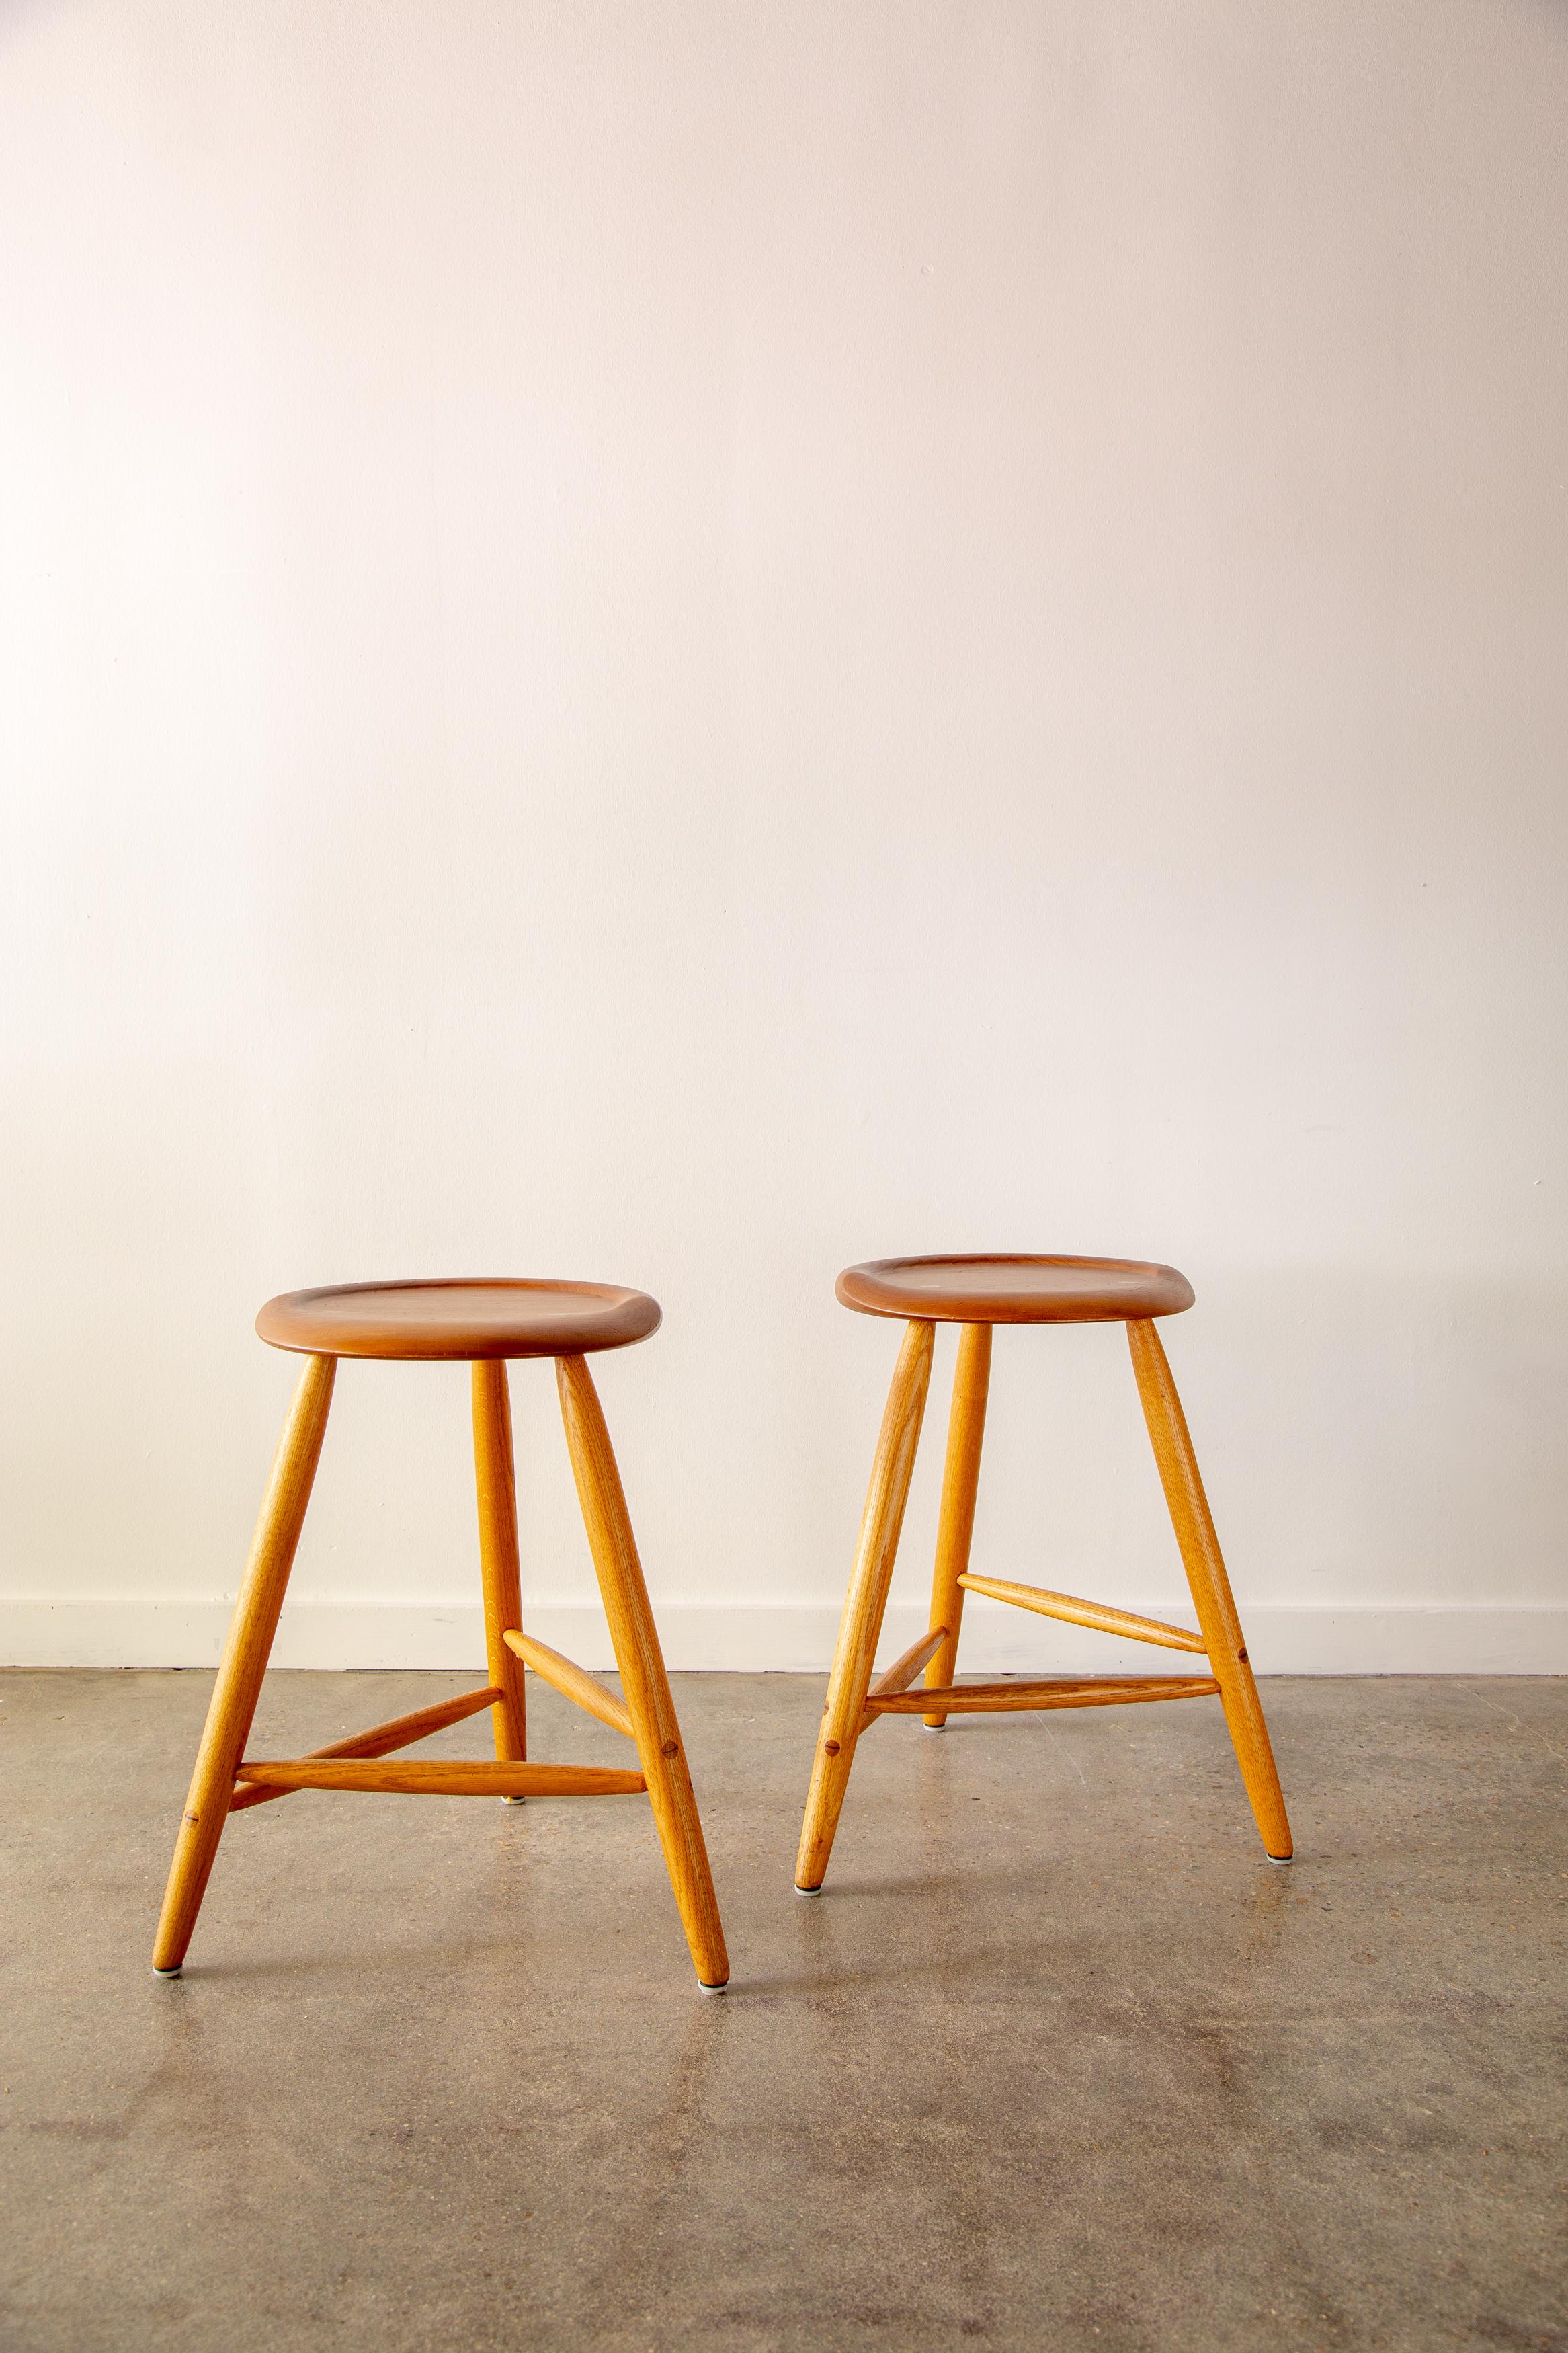 A pair of 1980s counter height stools by Kai Pedersen.  Sculpted seats of solid cherry on three ash legs.  Designed and made at Kai Pedersen Studios in 1991. Handcrafted by Kai Pedersen near new hope Pennsylvania. Sculpted seats, bent plywood backs,